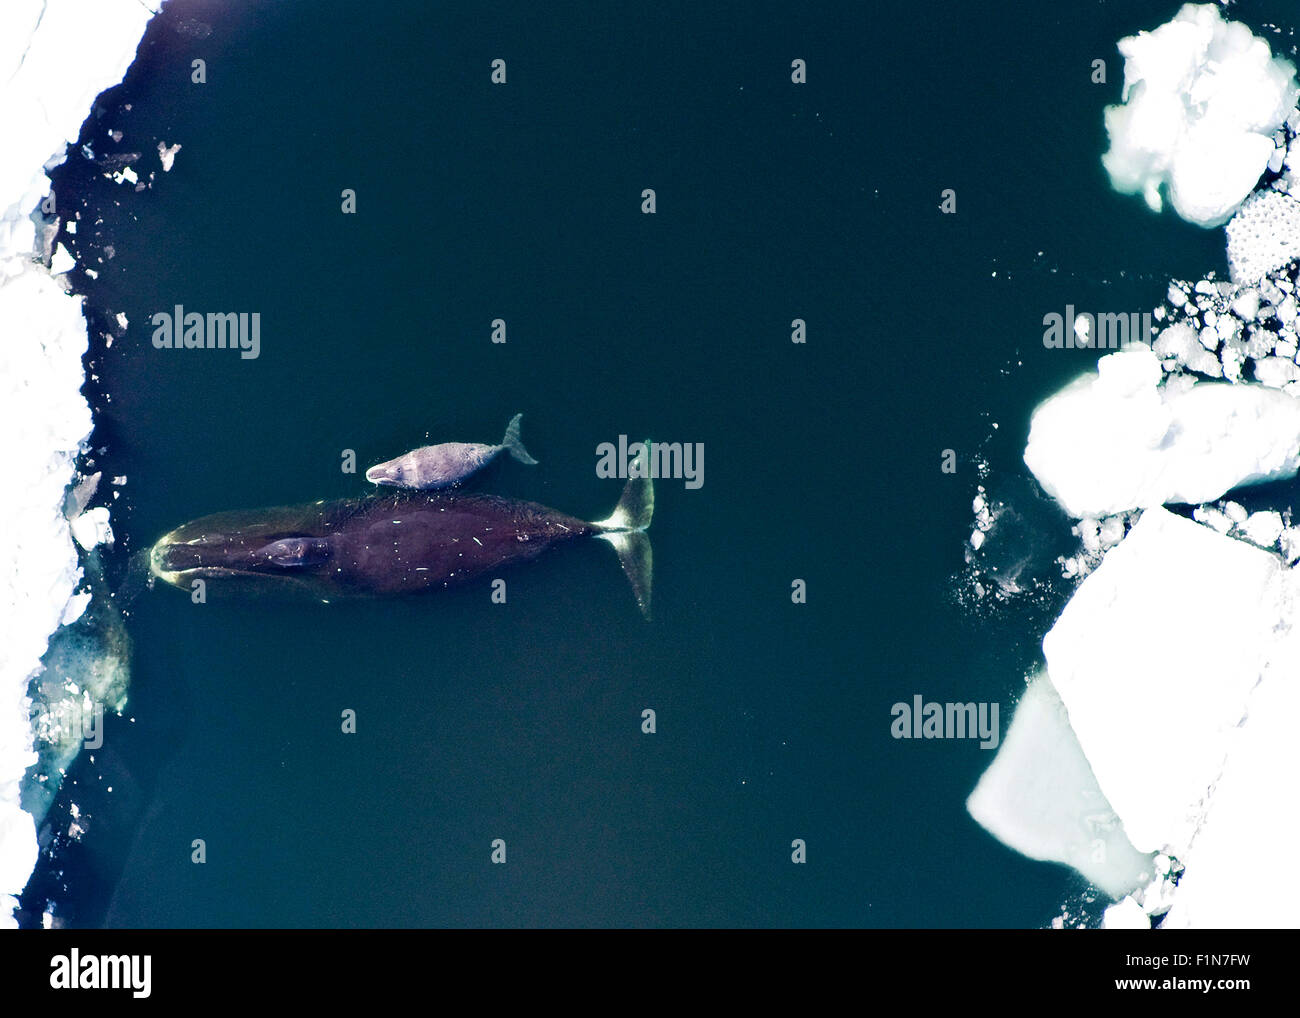 A Bowhead whale and calf in the Arctic Ocean. Bowhead whales can reach up to  66 feet or 20 meters in length and weight 100 tonnes Stock Photo - Alamy